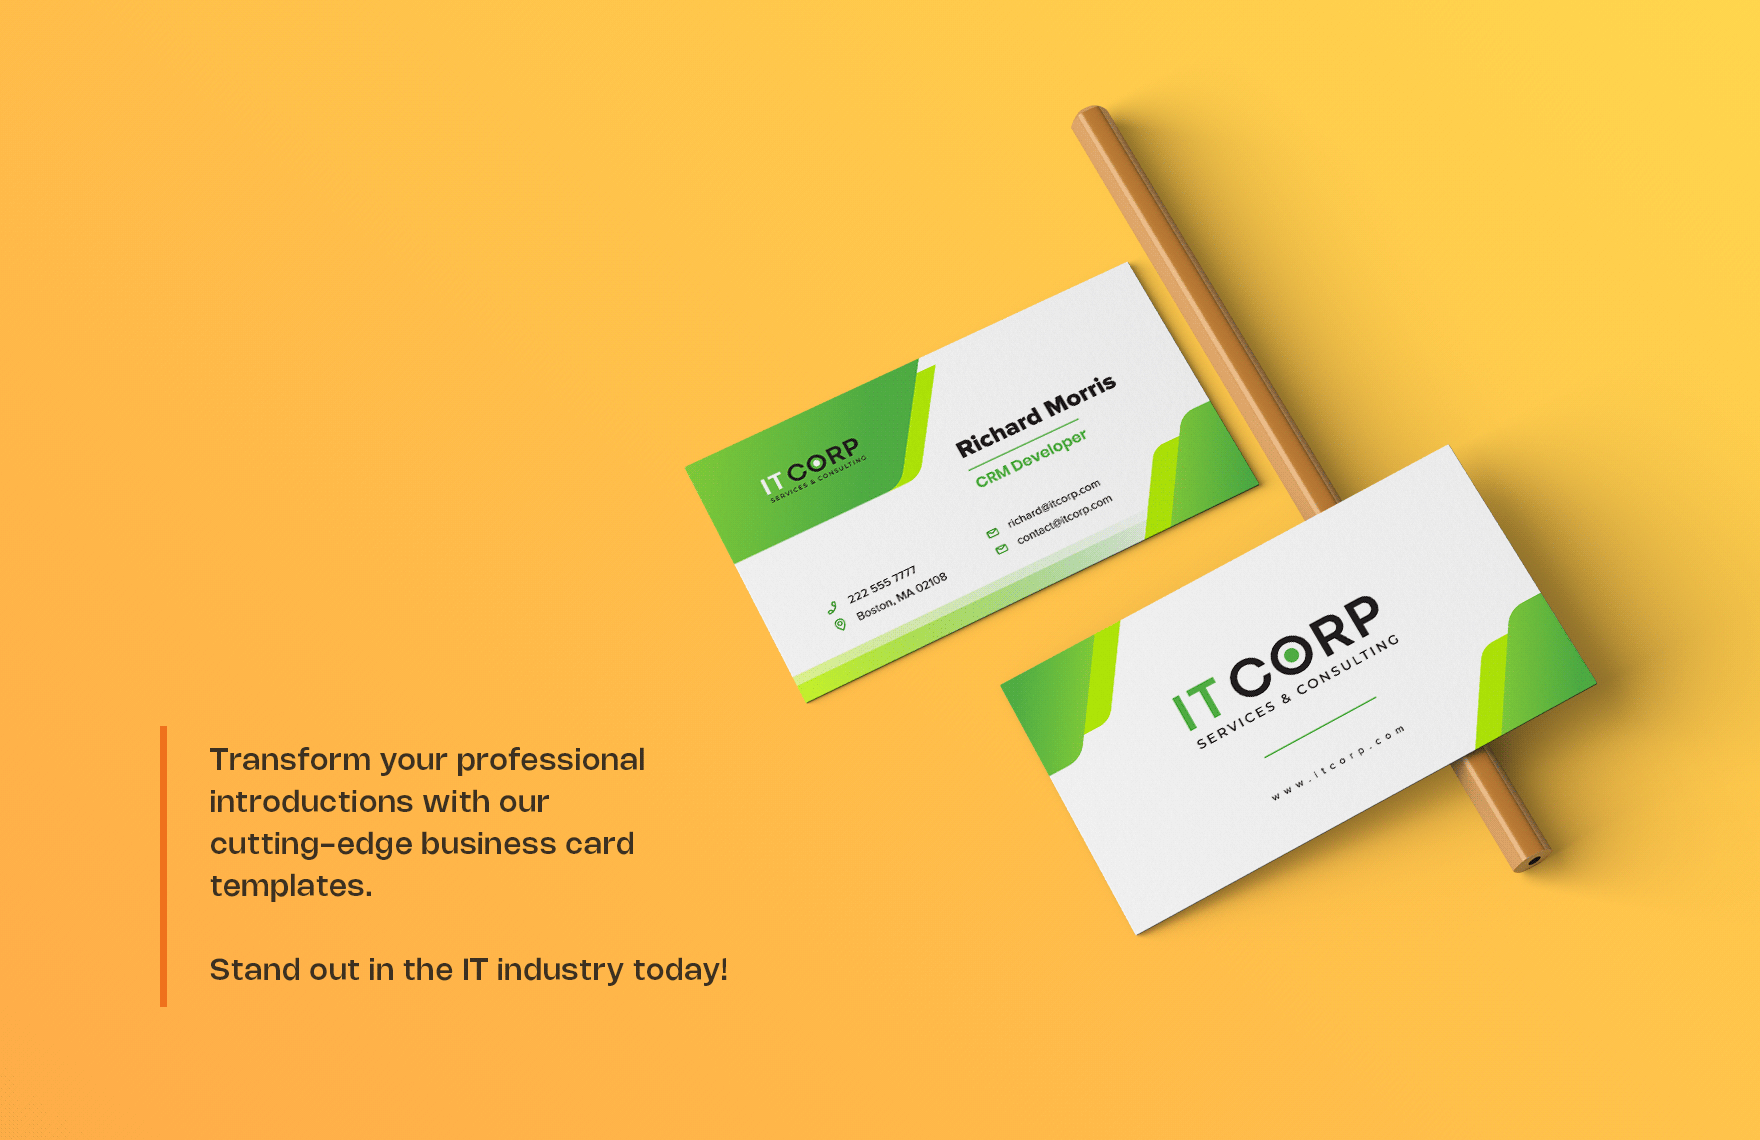 IT CRM Consulting Business Card Template